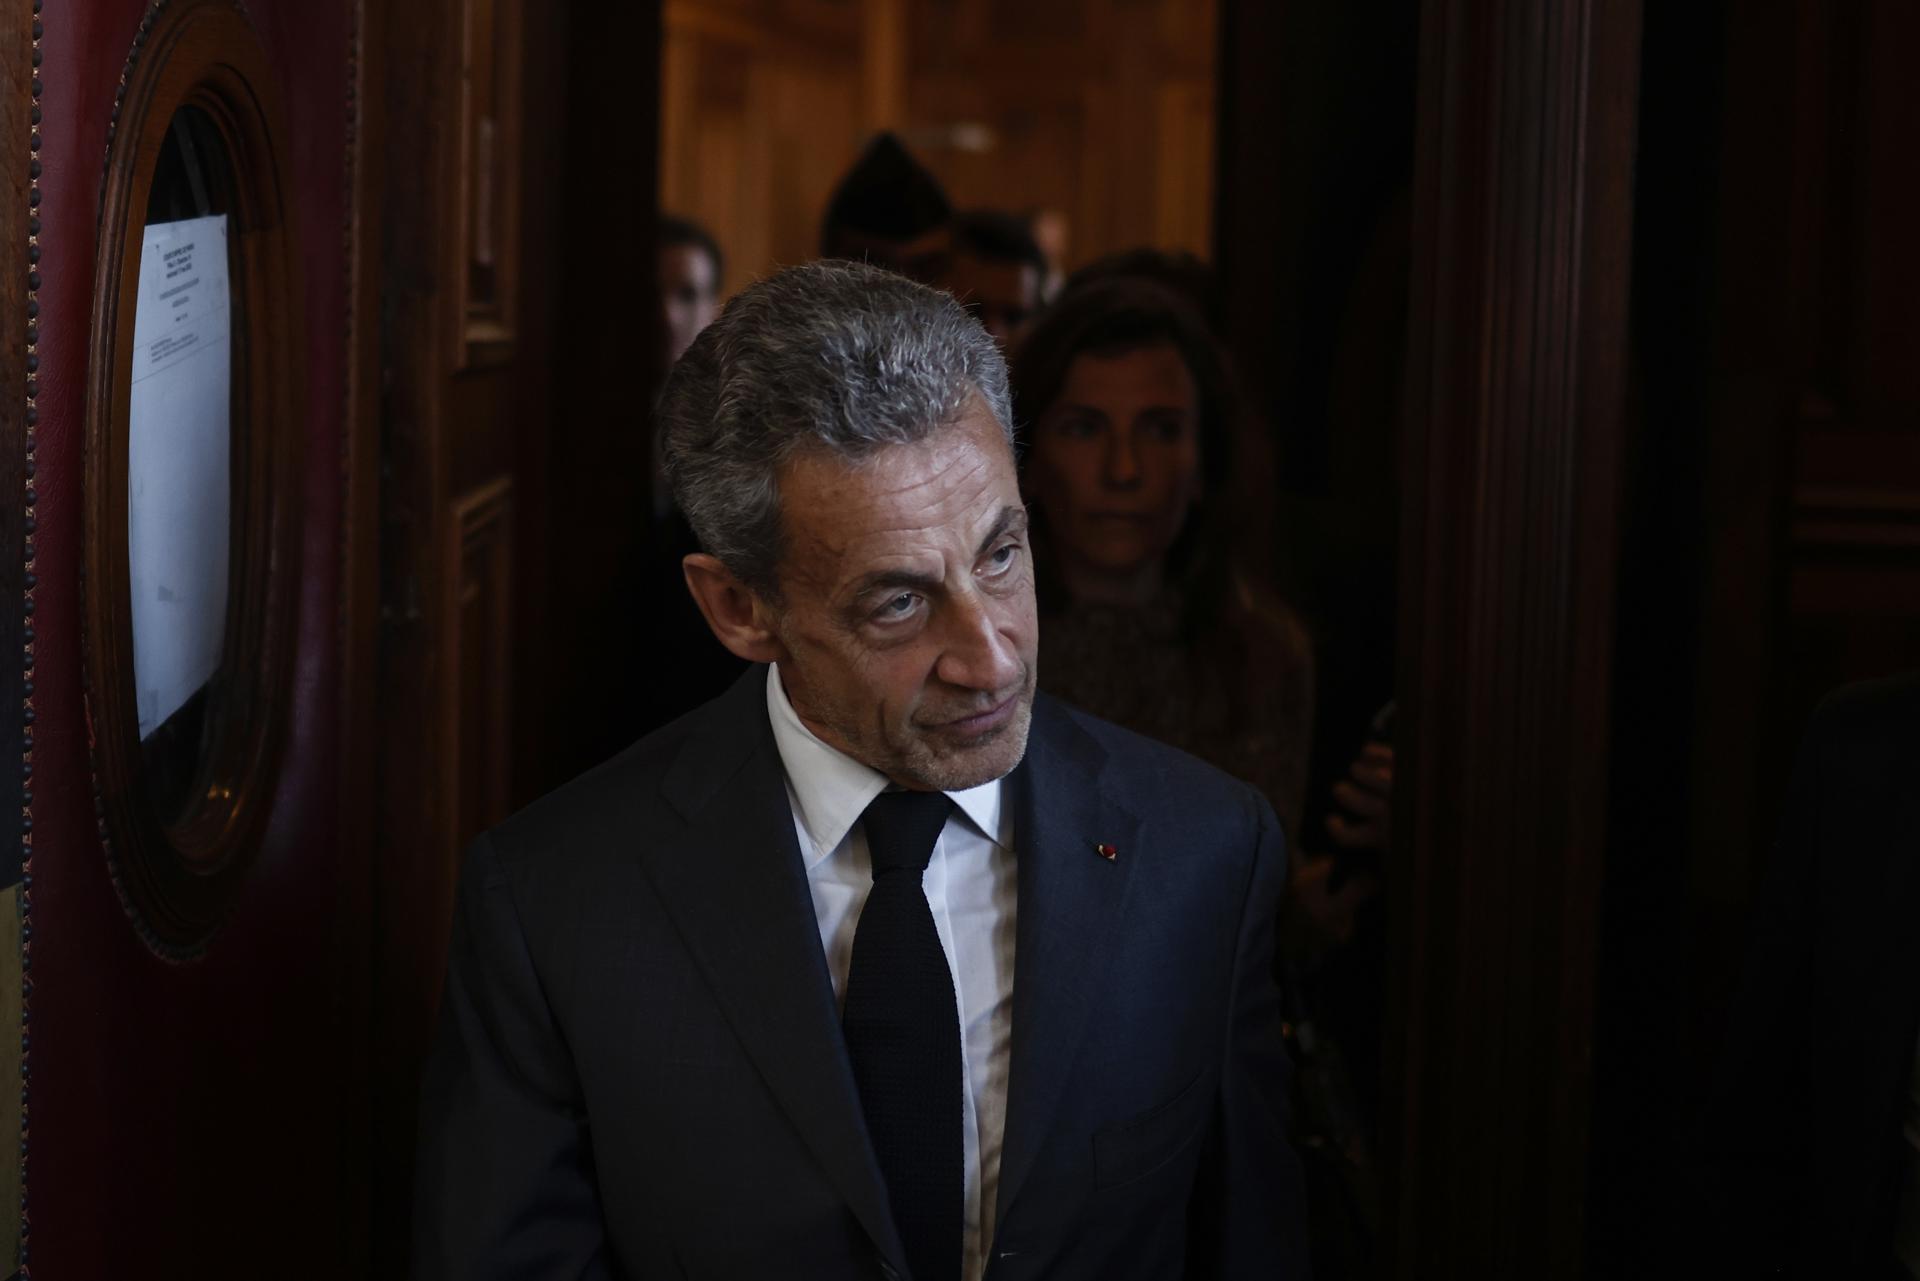 Former French President Nicolas Sarkozy exits the courthouse after appeal court upheld his corruption conviction, Paris, France, 17 May 2023. EFE/EPA/YOAN VALAT